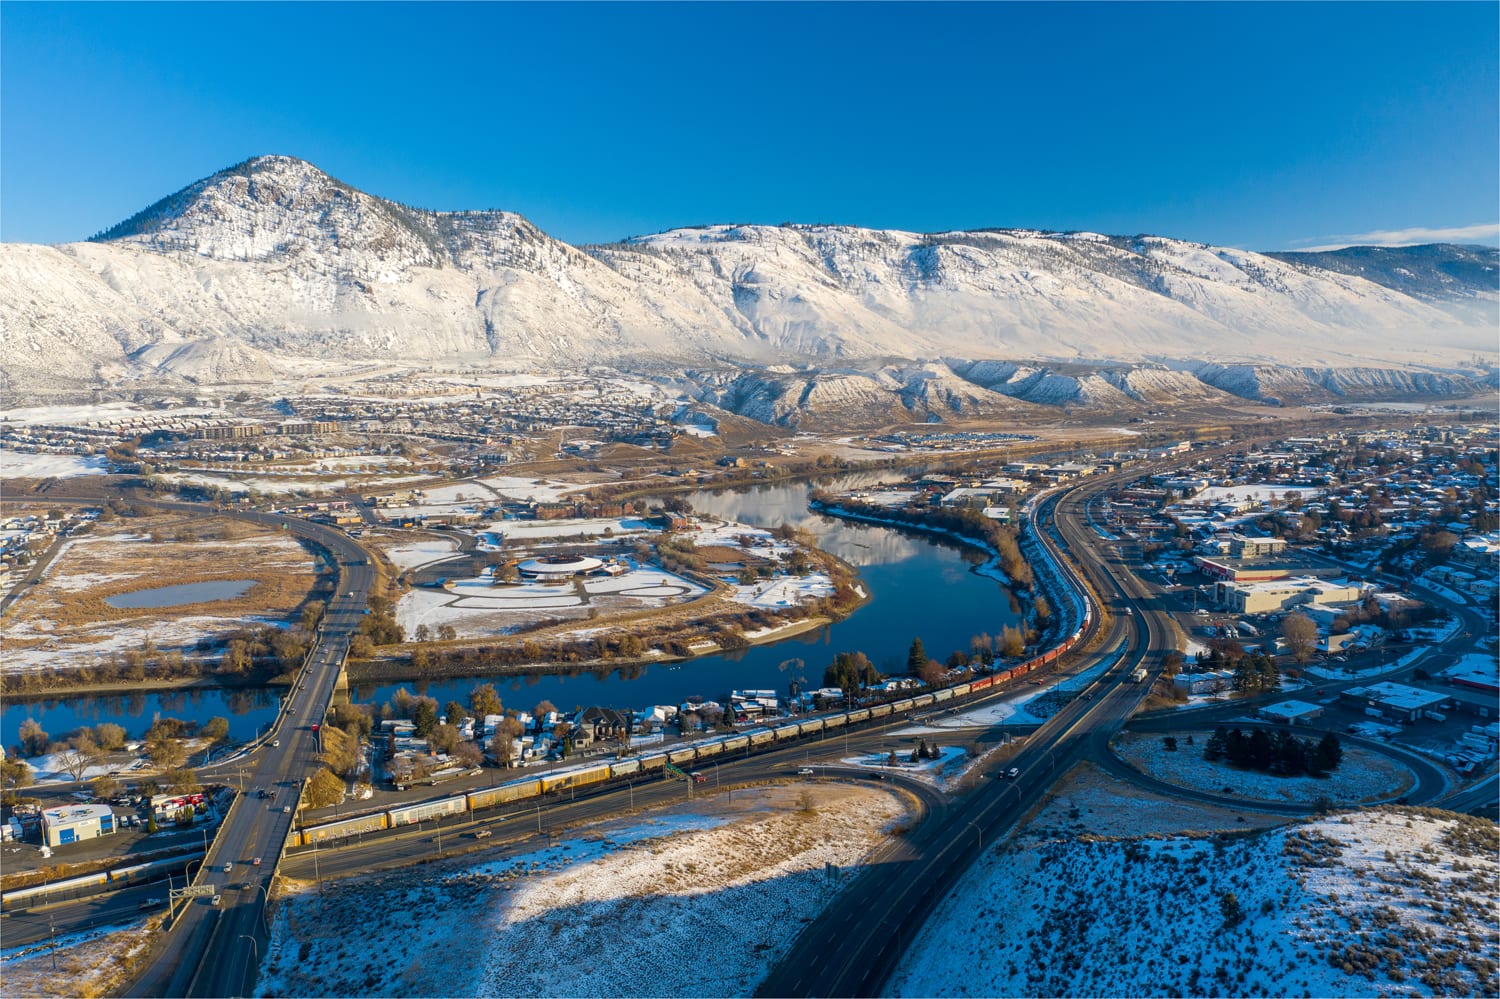 Kamloops City Aerial city with winding road and river with snowy mountain